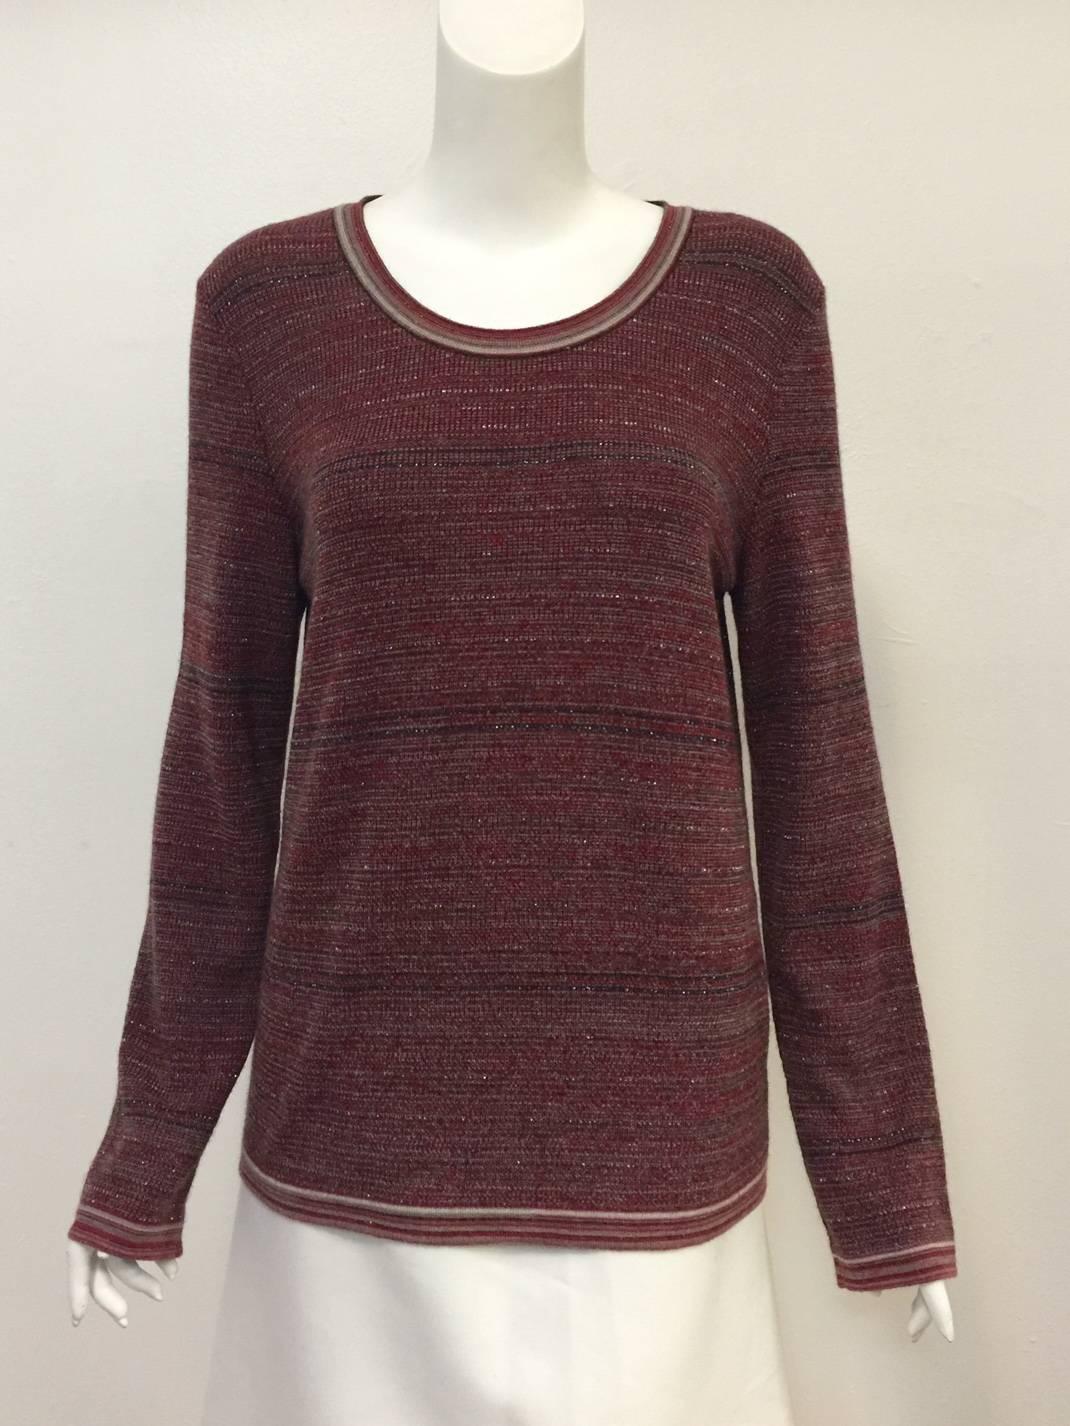 Chanel Cashmere Blend Pullover proves that cozy can be chic!  Features horizontal stripes ranging in color from burgundy to claret  to charcoal and metallic silver, long sleeves, generous proportions and round, banded neckline.  Keyhole rear closure